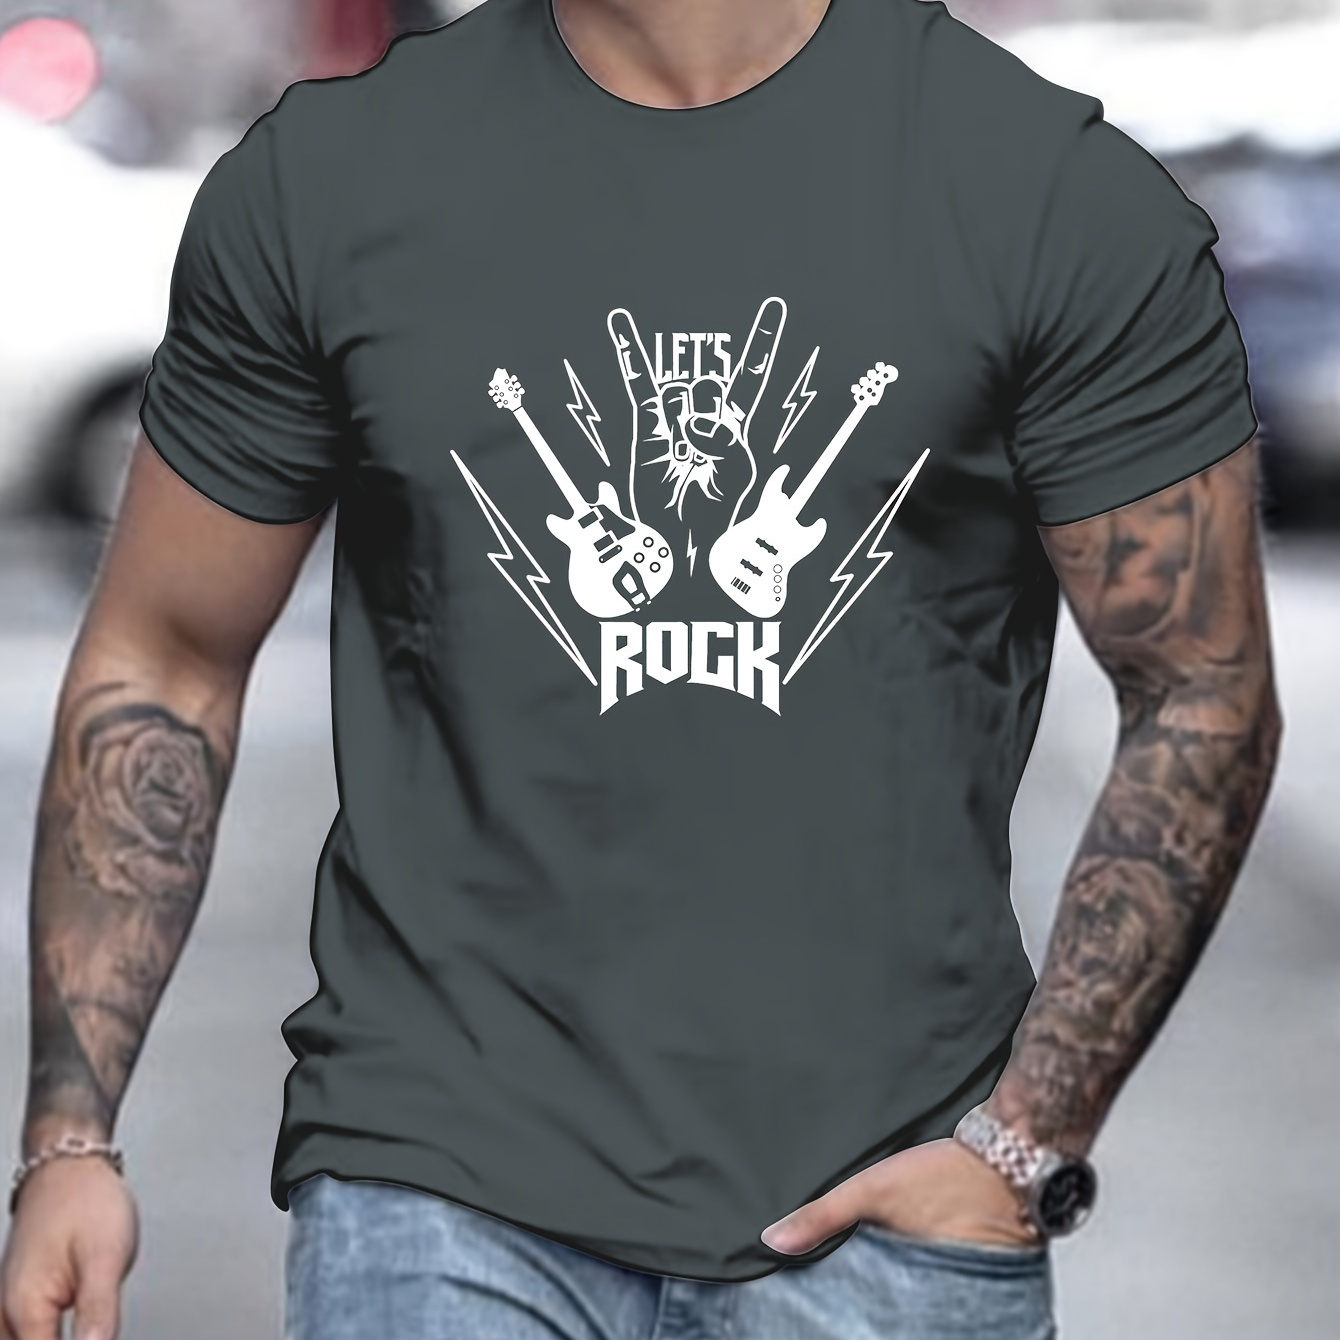 

Rock Guitar Graphic Men's Short Sleeve T-shirt, Comfy Stretchy Trendy Tees For Summer, Casual Daily Style Fashion Clothing